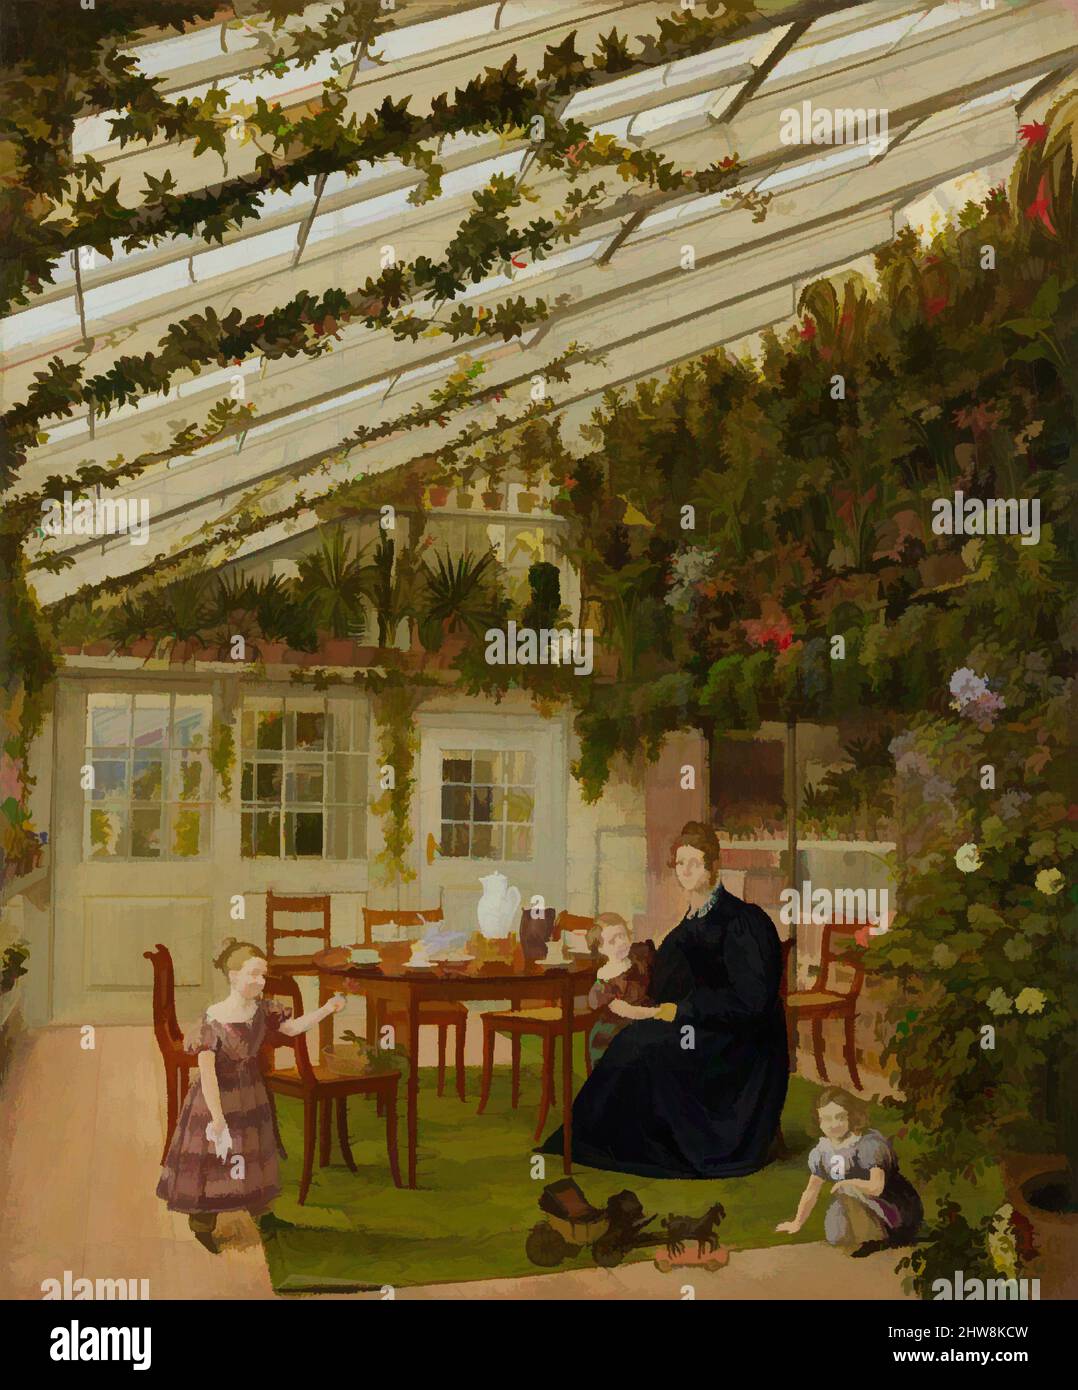 Art inspired by The Family of Mr. Westfal in the Conservatory, 1836, Oil on canvas, 9 3/8 x 7 7/8 in. (23.8 x 20 cm), Paintings, Eduard Gaertner (German, Berlin 1801–1877 Zechlin), This light-filled conservatory belonged to the prosperous Berlin wool merchant Christian Carl Westphal, a, Classic works modernized by Artotop with a splash of modernity. Shapes, color and value, eye-catching visual impact on art. Emotions through freedom of artworks in a contemporary way. A timeless message pursuing a wildly creative new direction. Artists turning to the digital medium and creating the Artotop NFT Stock Photo